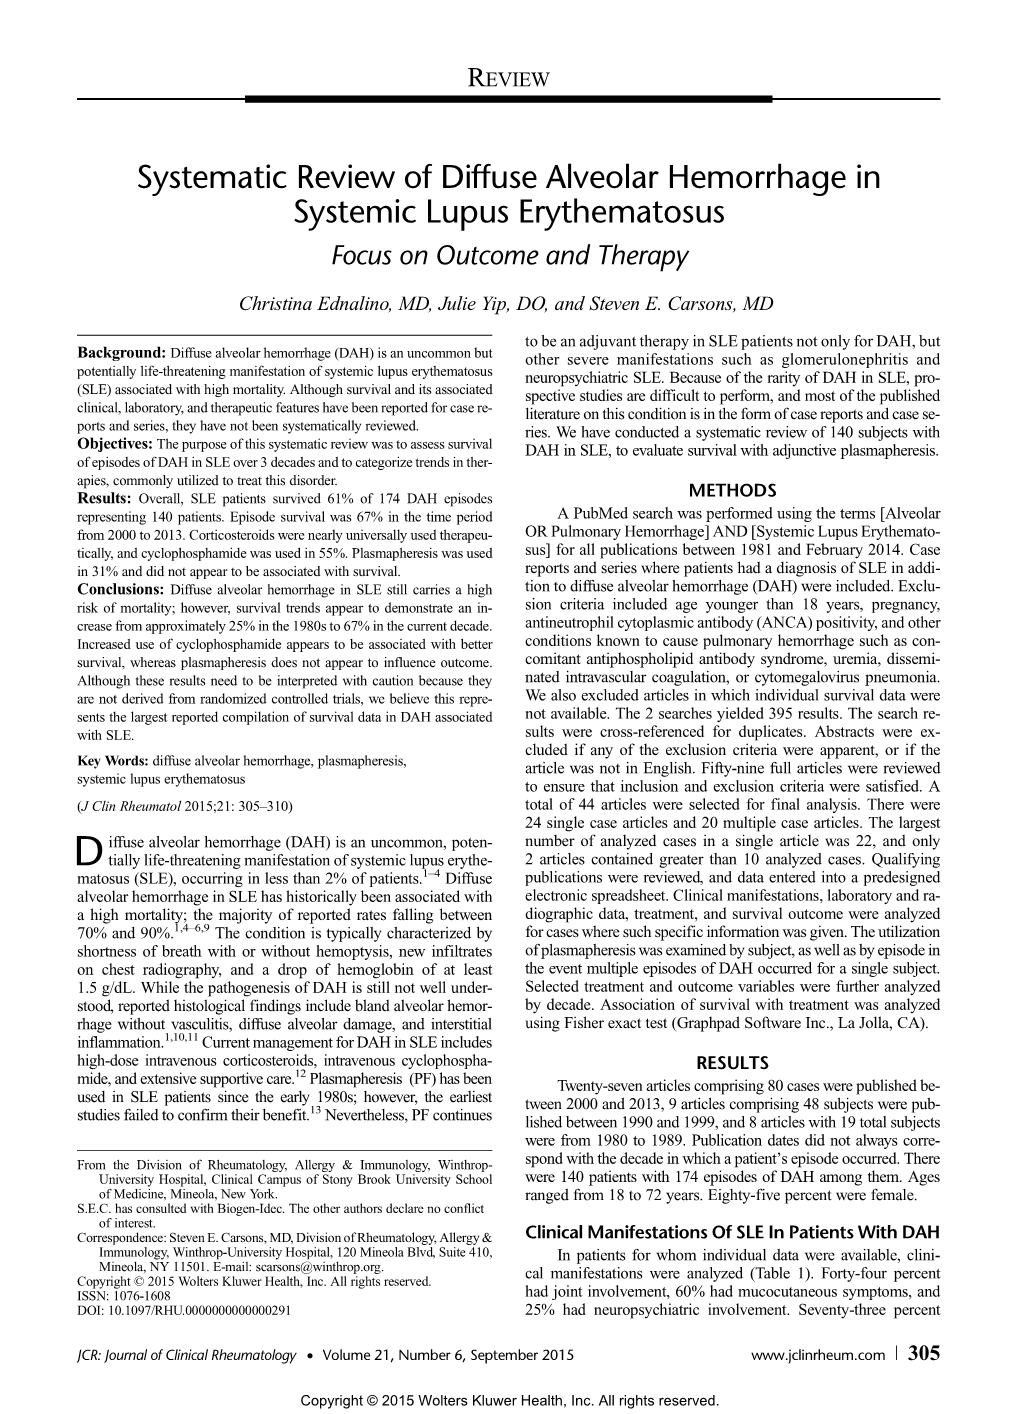 Systematic Review of Diffuse Alveolar Hemorrhage in Systemic Lupus Erythematosus Focus on Outcome and Therapy